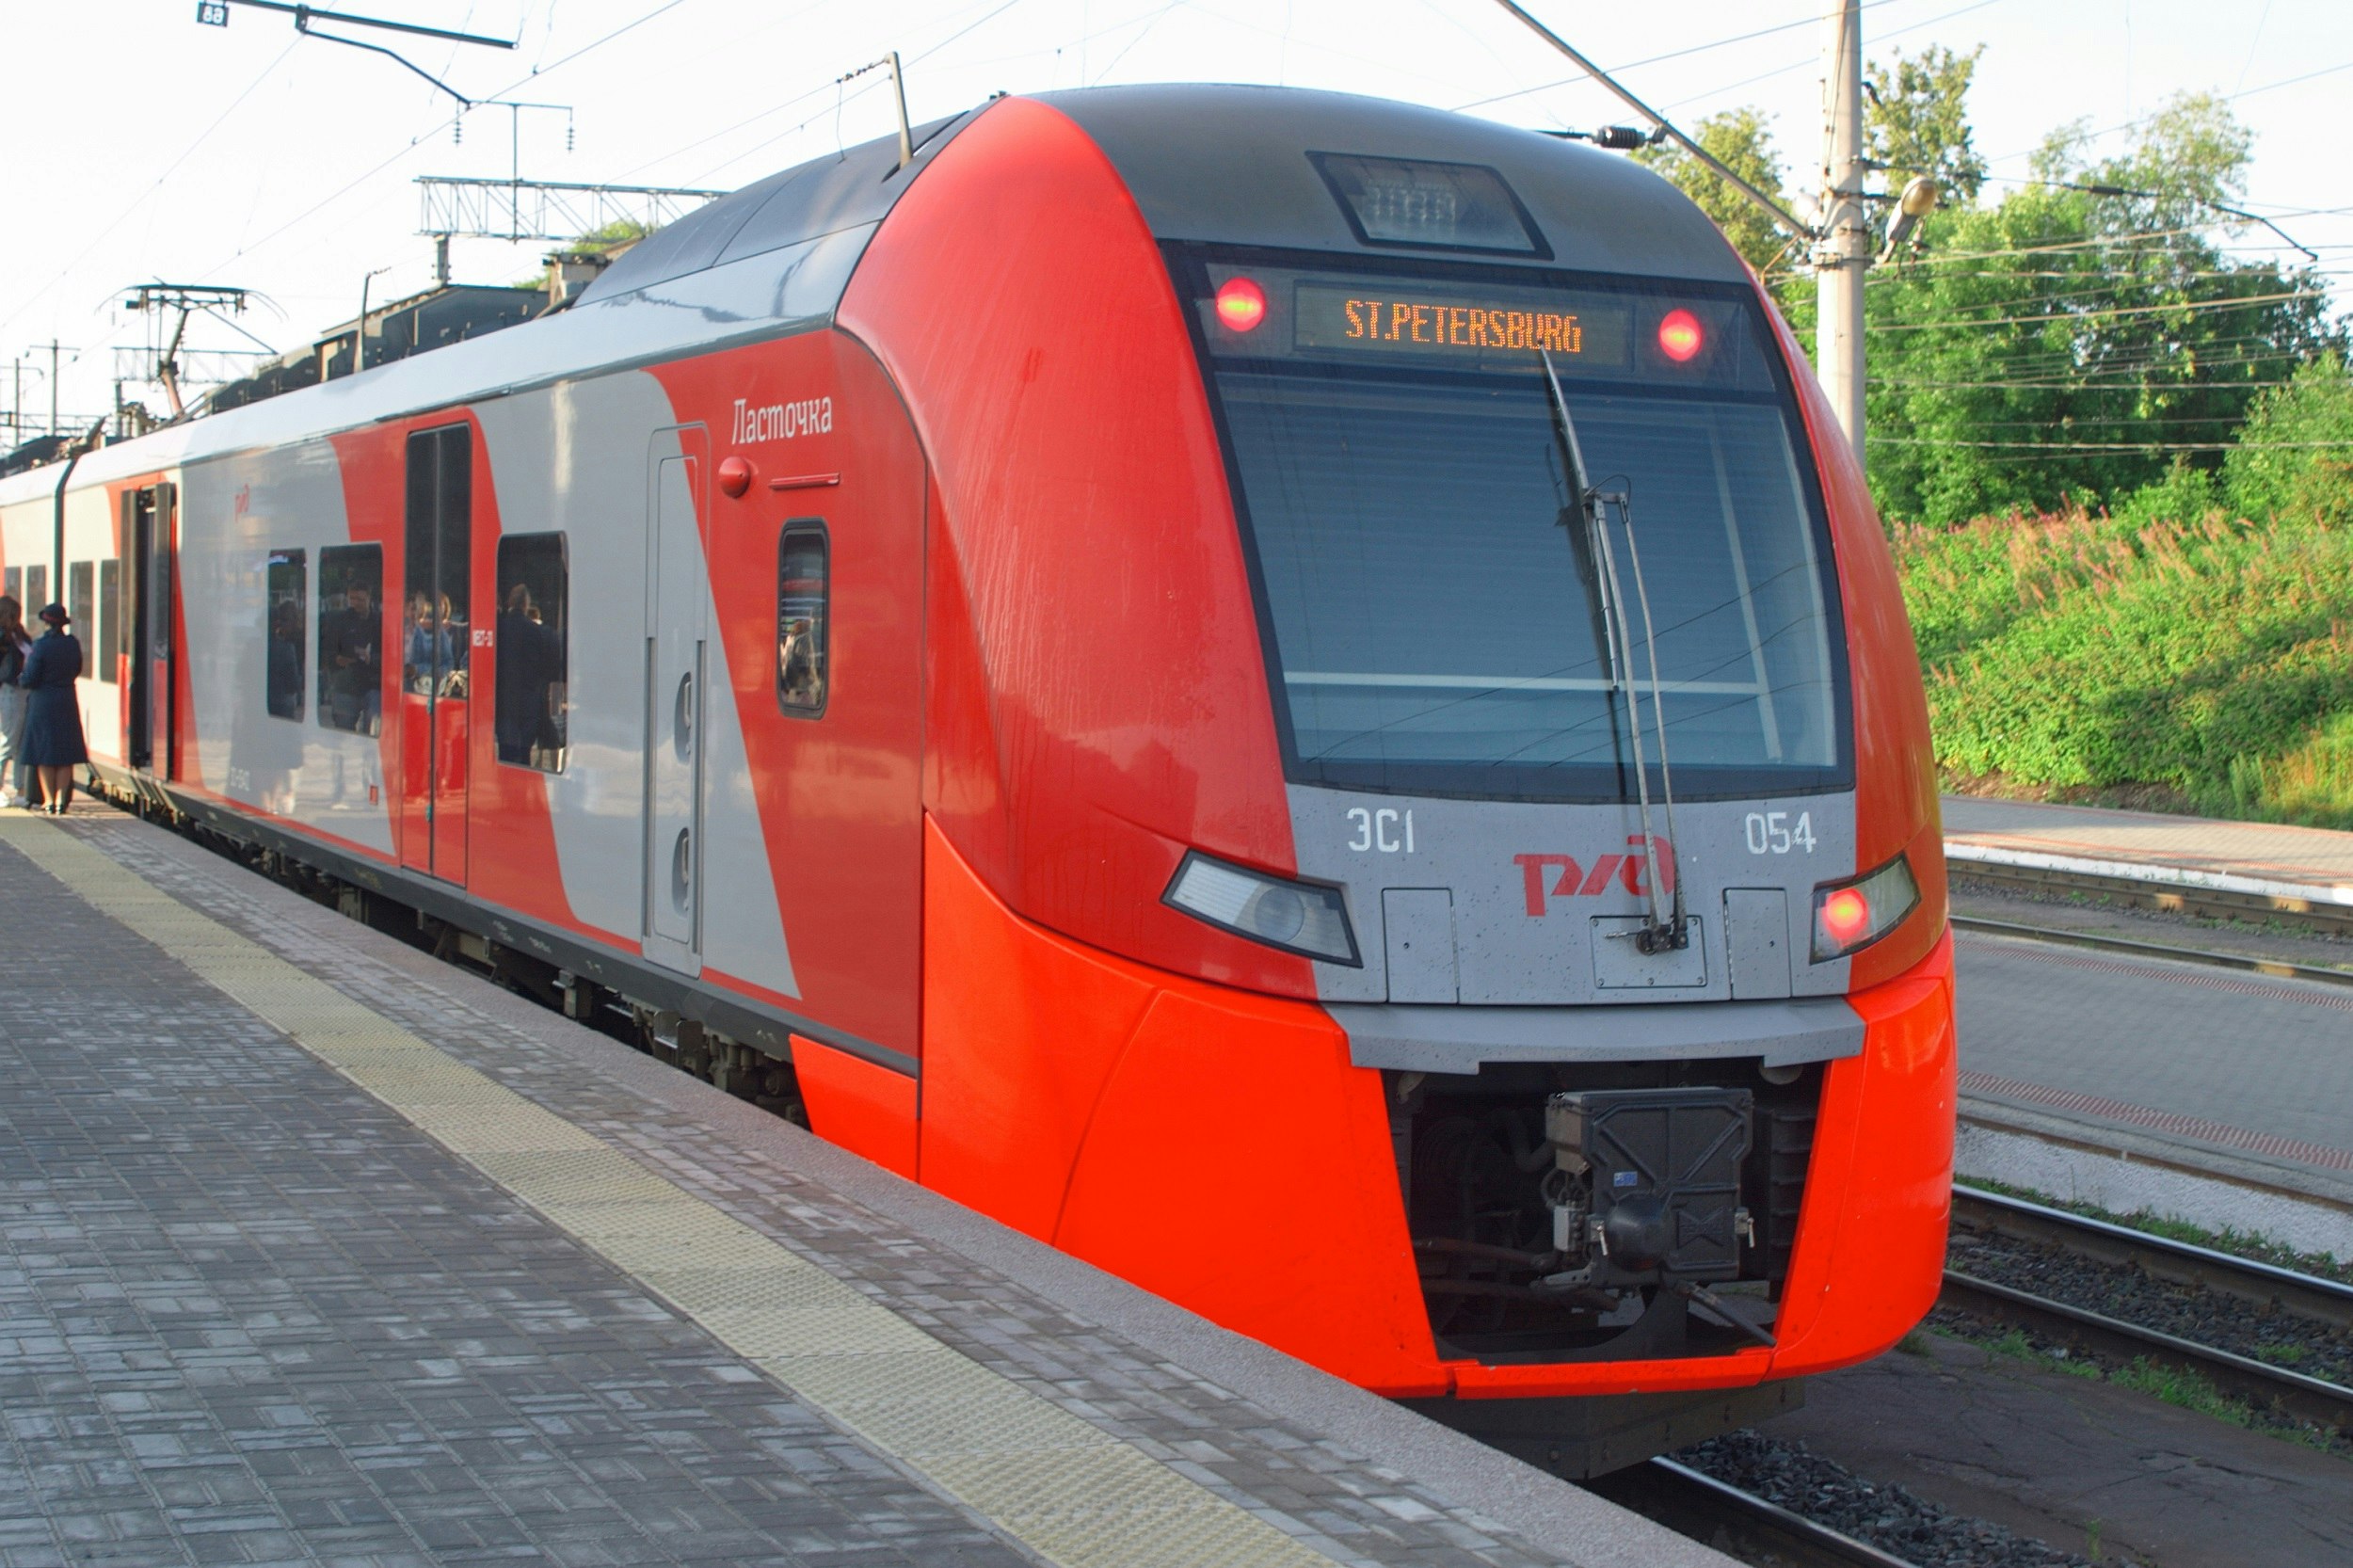 The front of a red-and-grey train waiting at a platform. The electronic sign at the front of the train says 'St Petersburg'